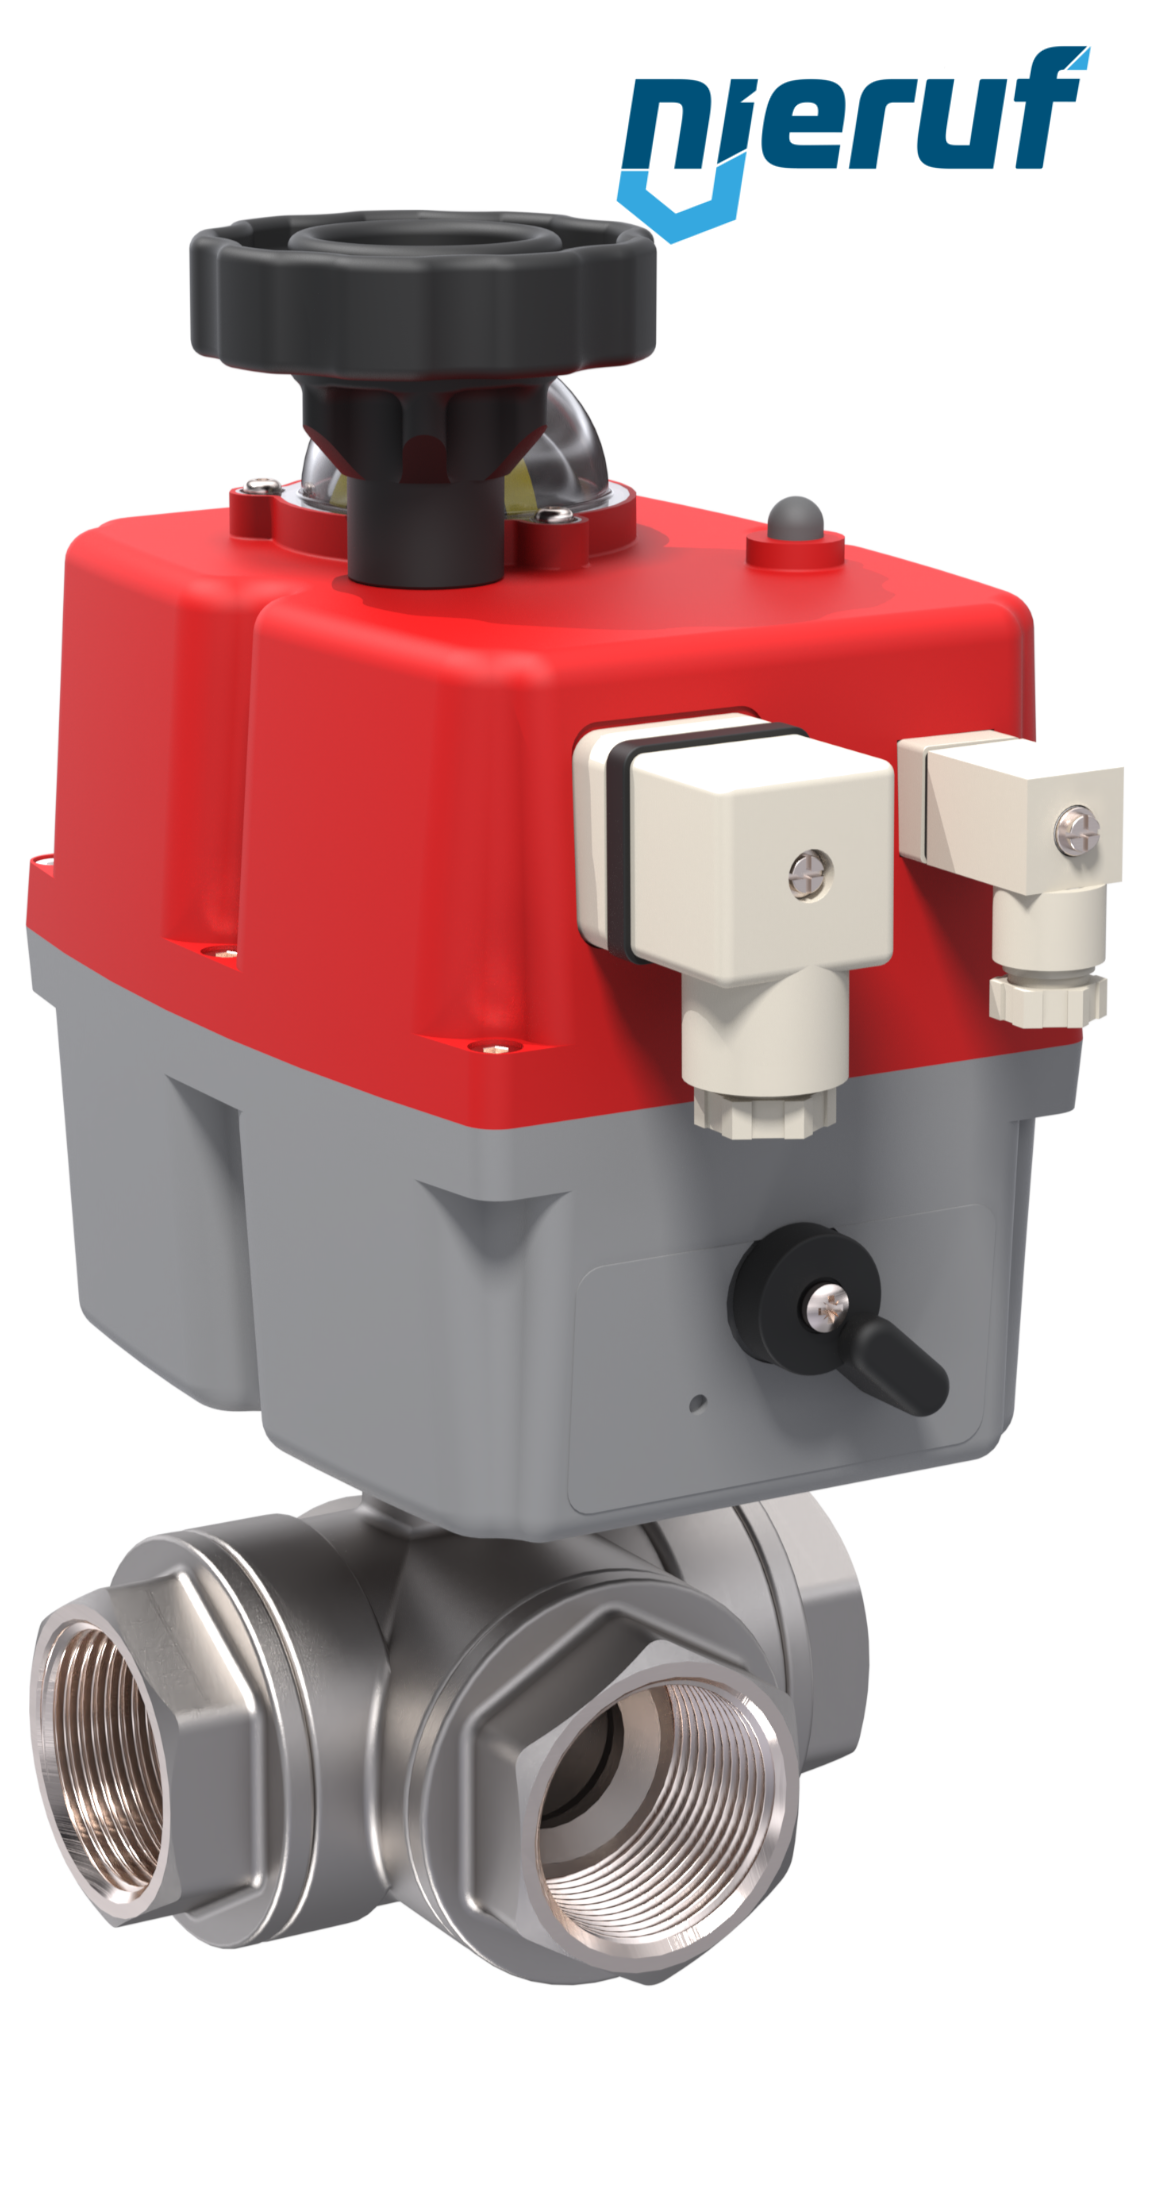 3 way automatic-ball valve 24-240V DN40 - 1 1/2" inch stainless steel reduced port design with L drilling